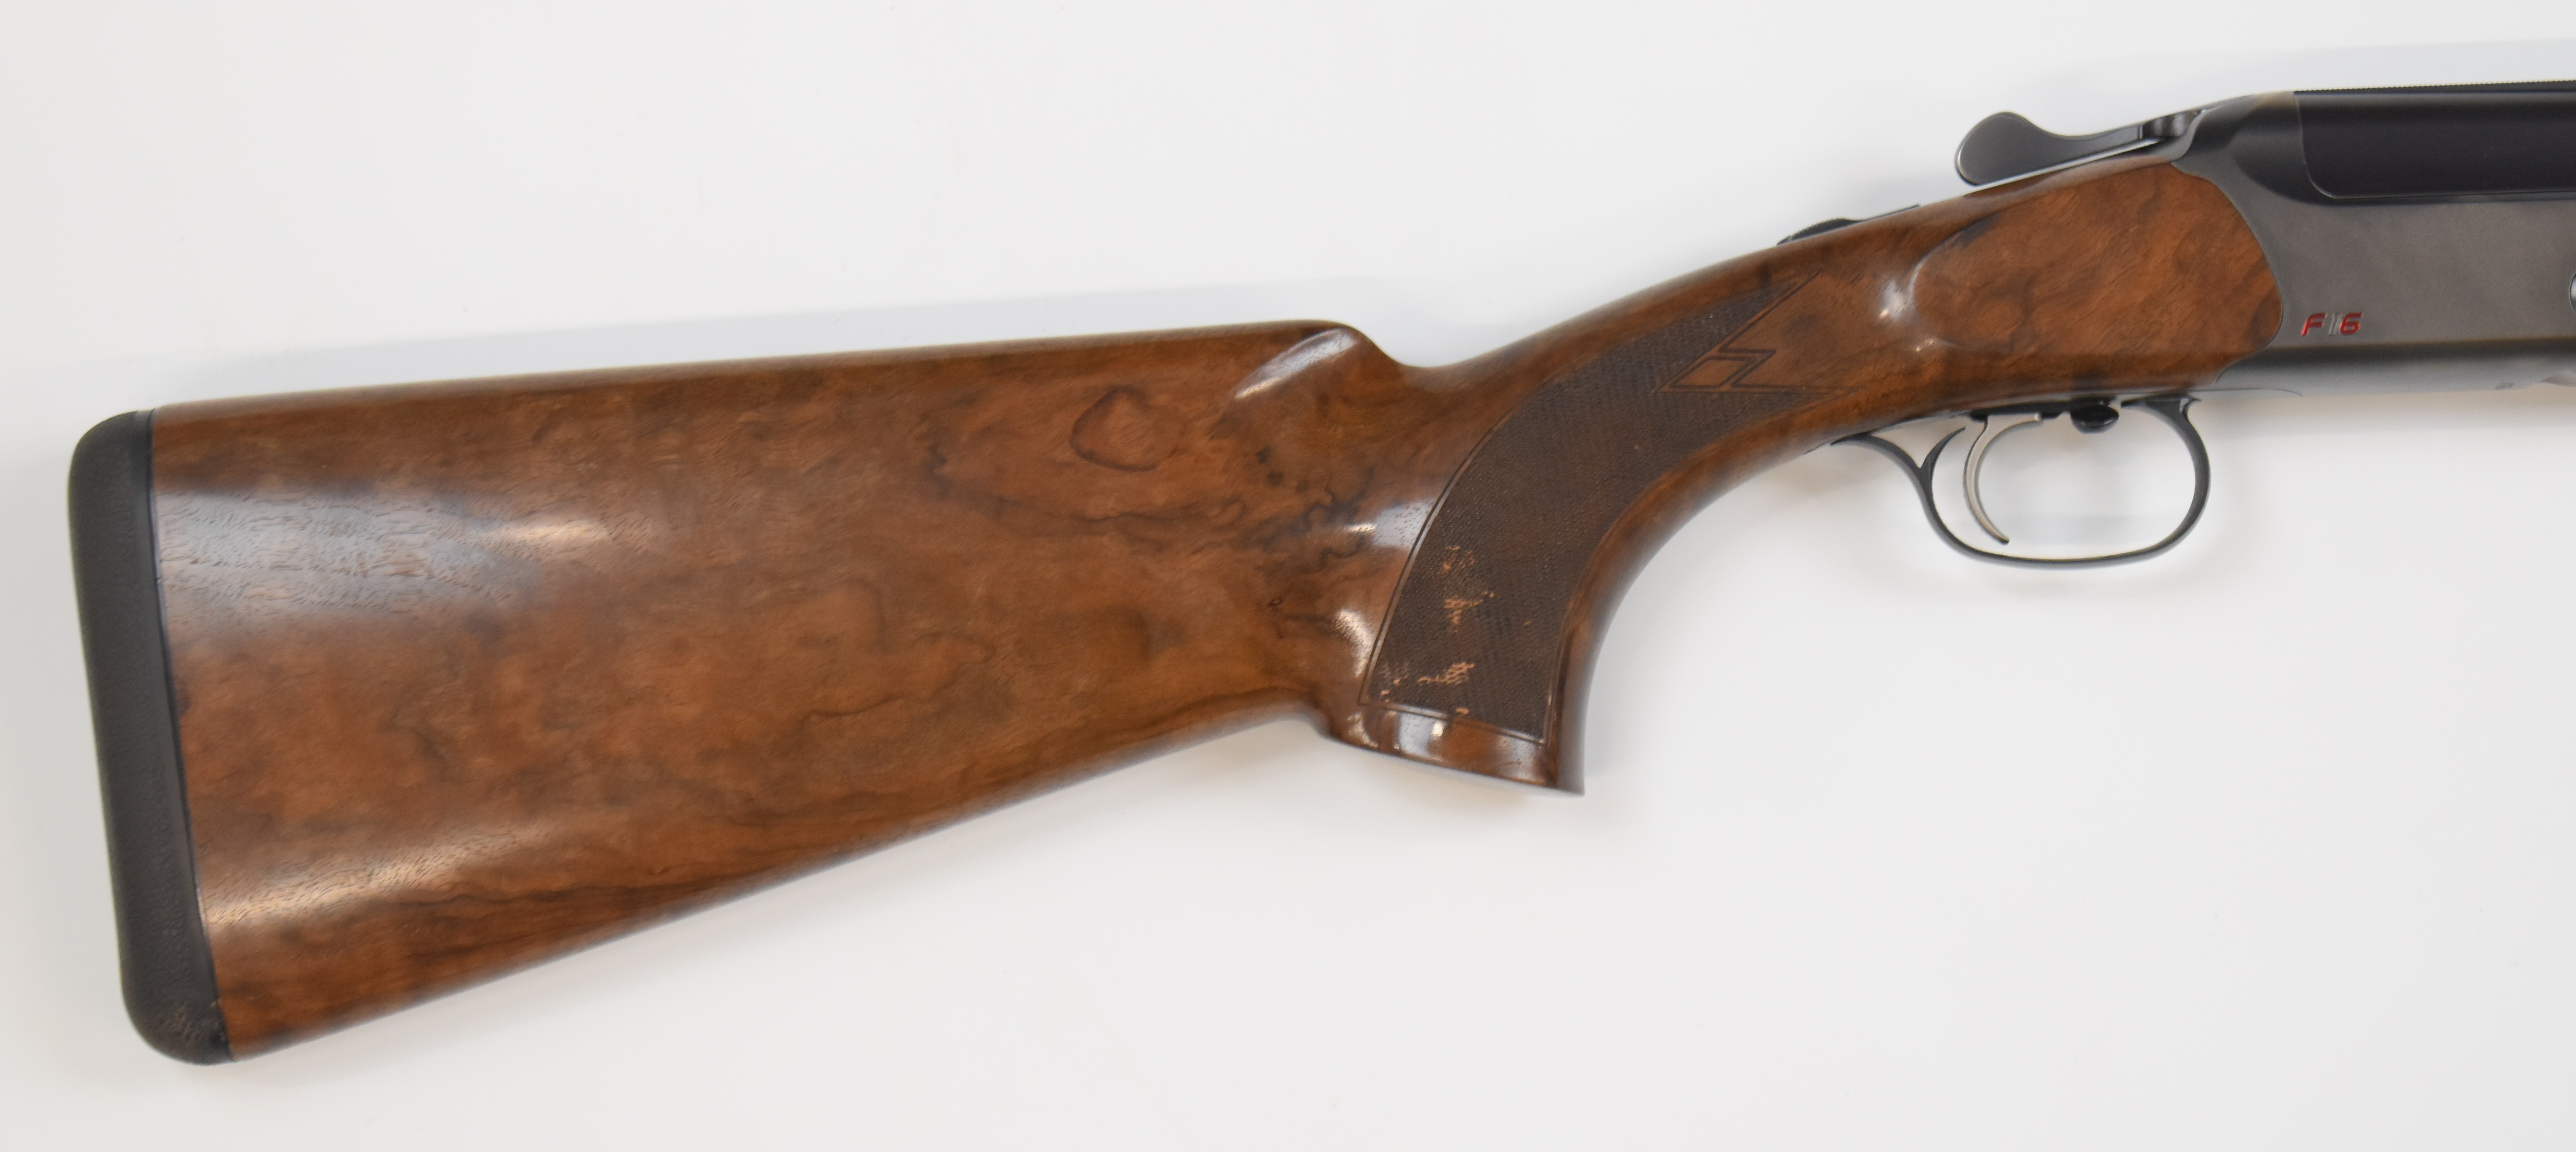 Blaser F16 12 bore over under ejector shotgun with named locks and underside, chequered semi- - Image 3 of 22